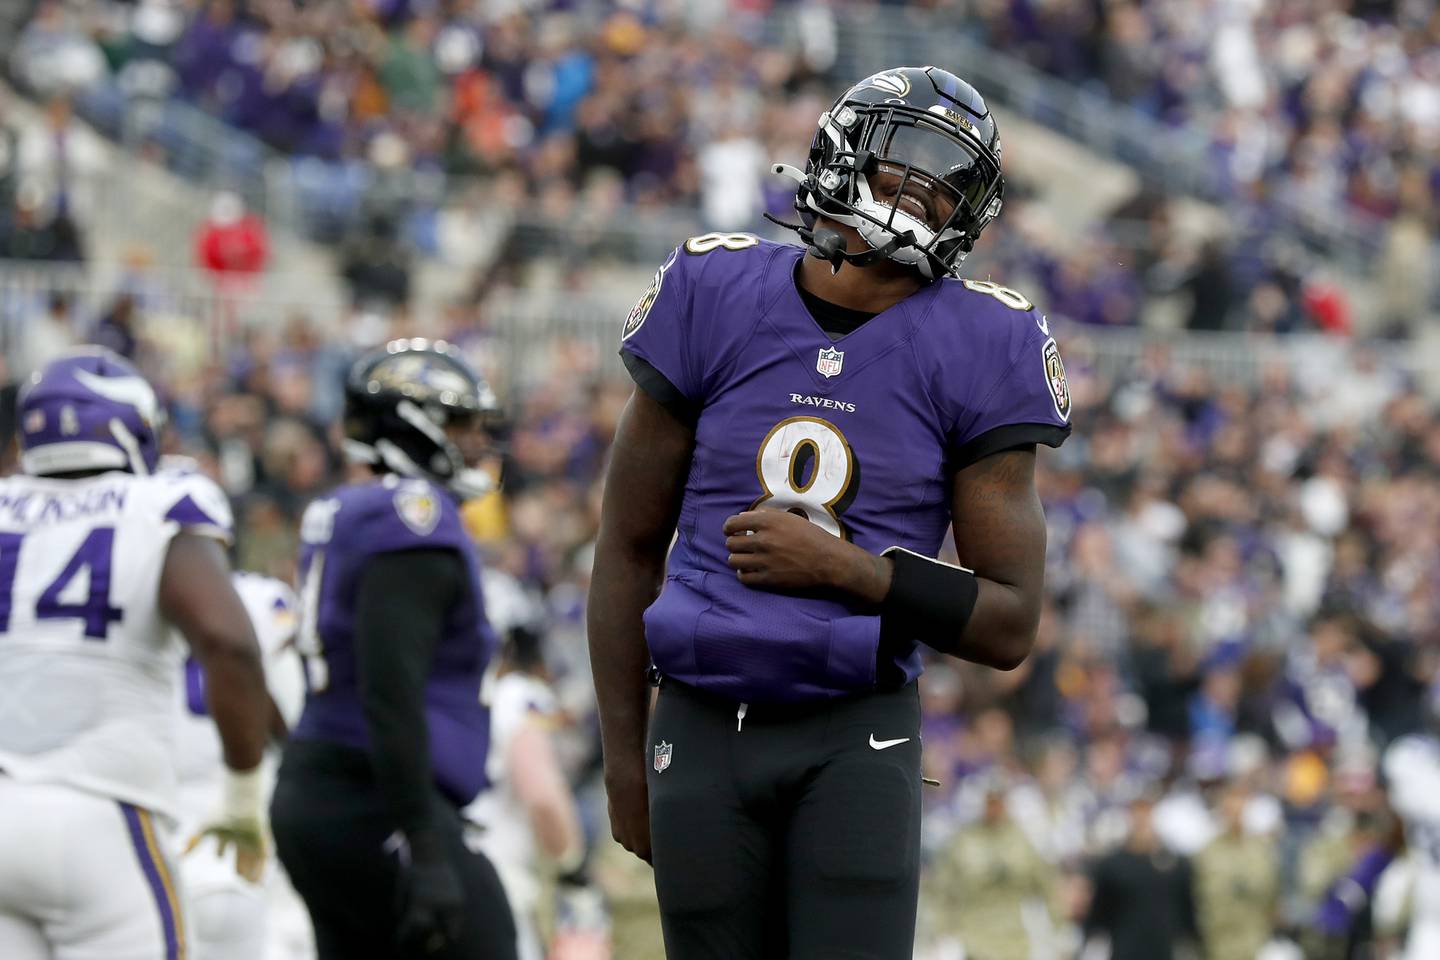 Lamar Jackson #8 of the Baltimore Ravens reacts after a fourth quarter touchdown against the Minnesota Vikings at M&T Bank Stadium on November 07, 2021 in Baltimore, Maryland.